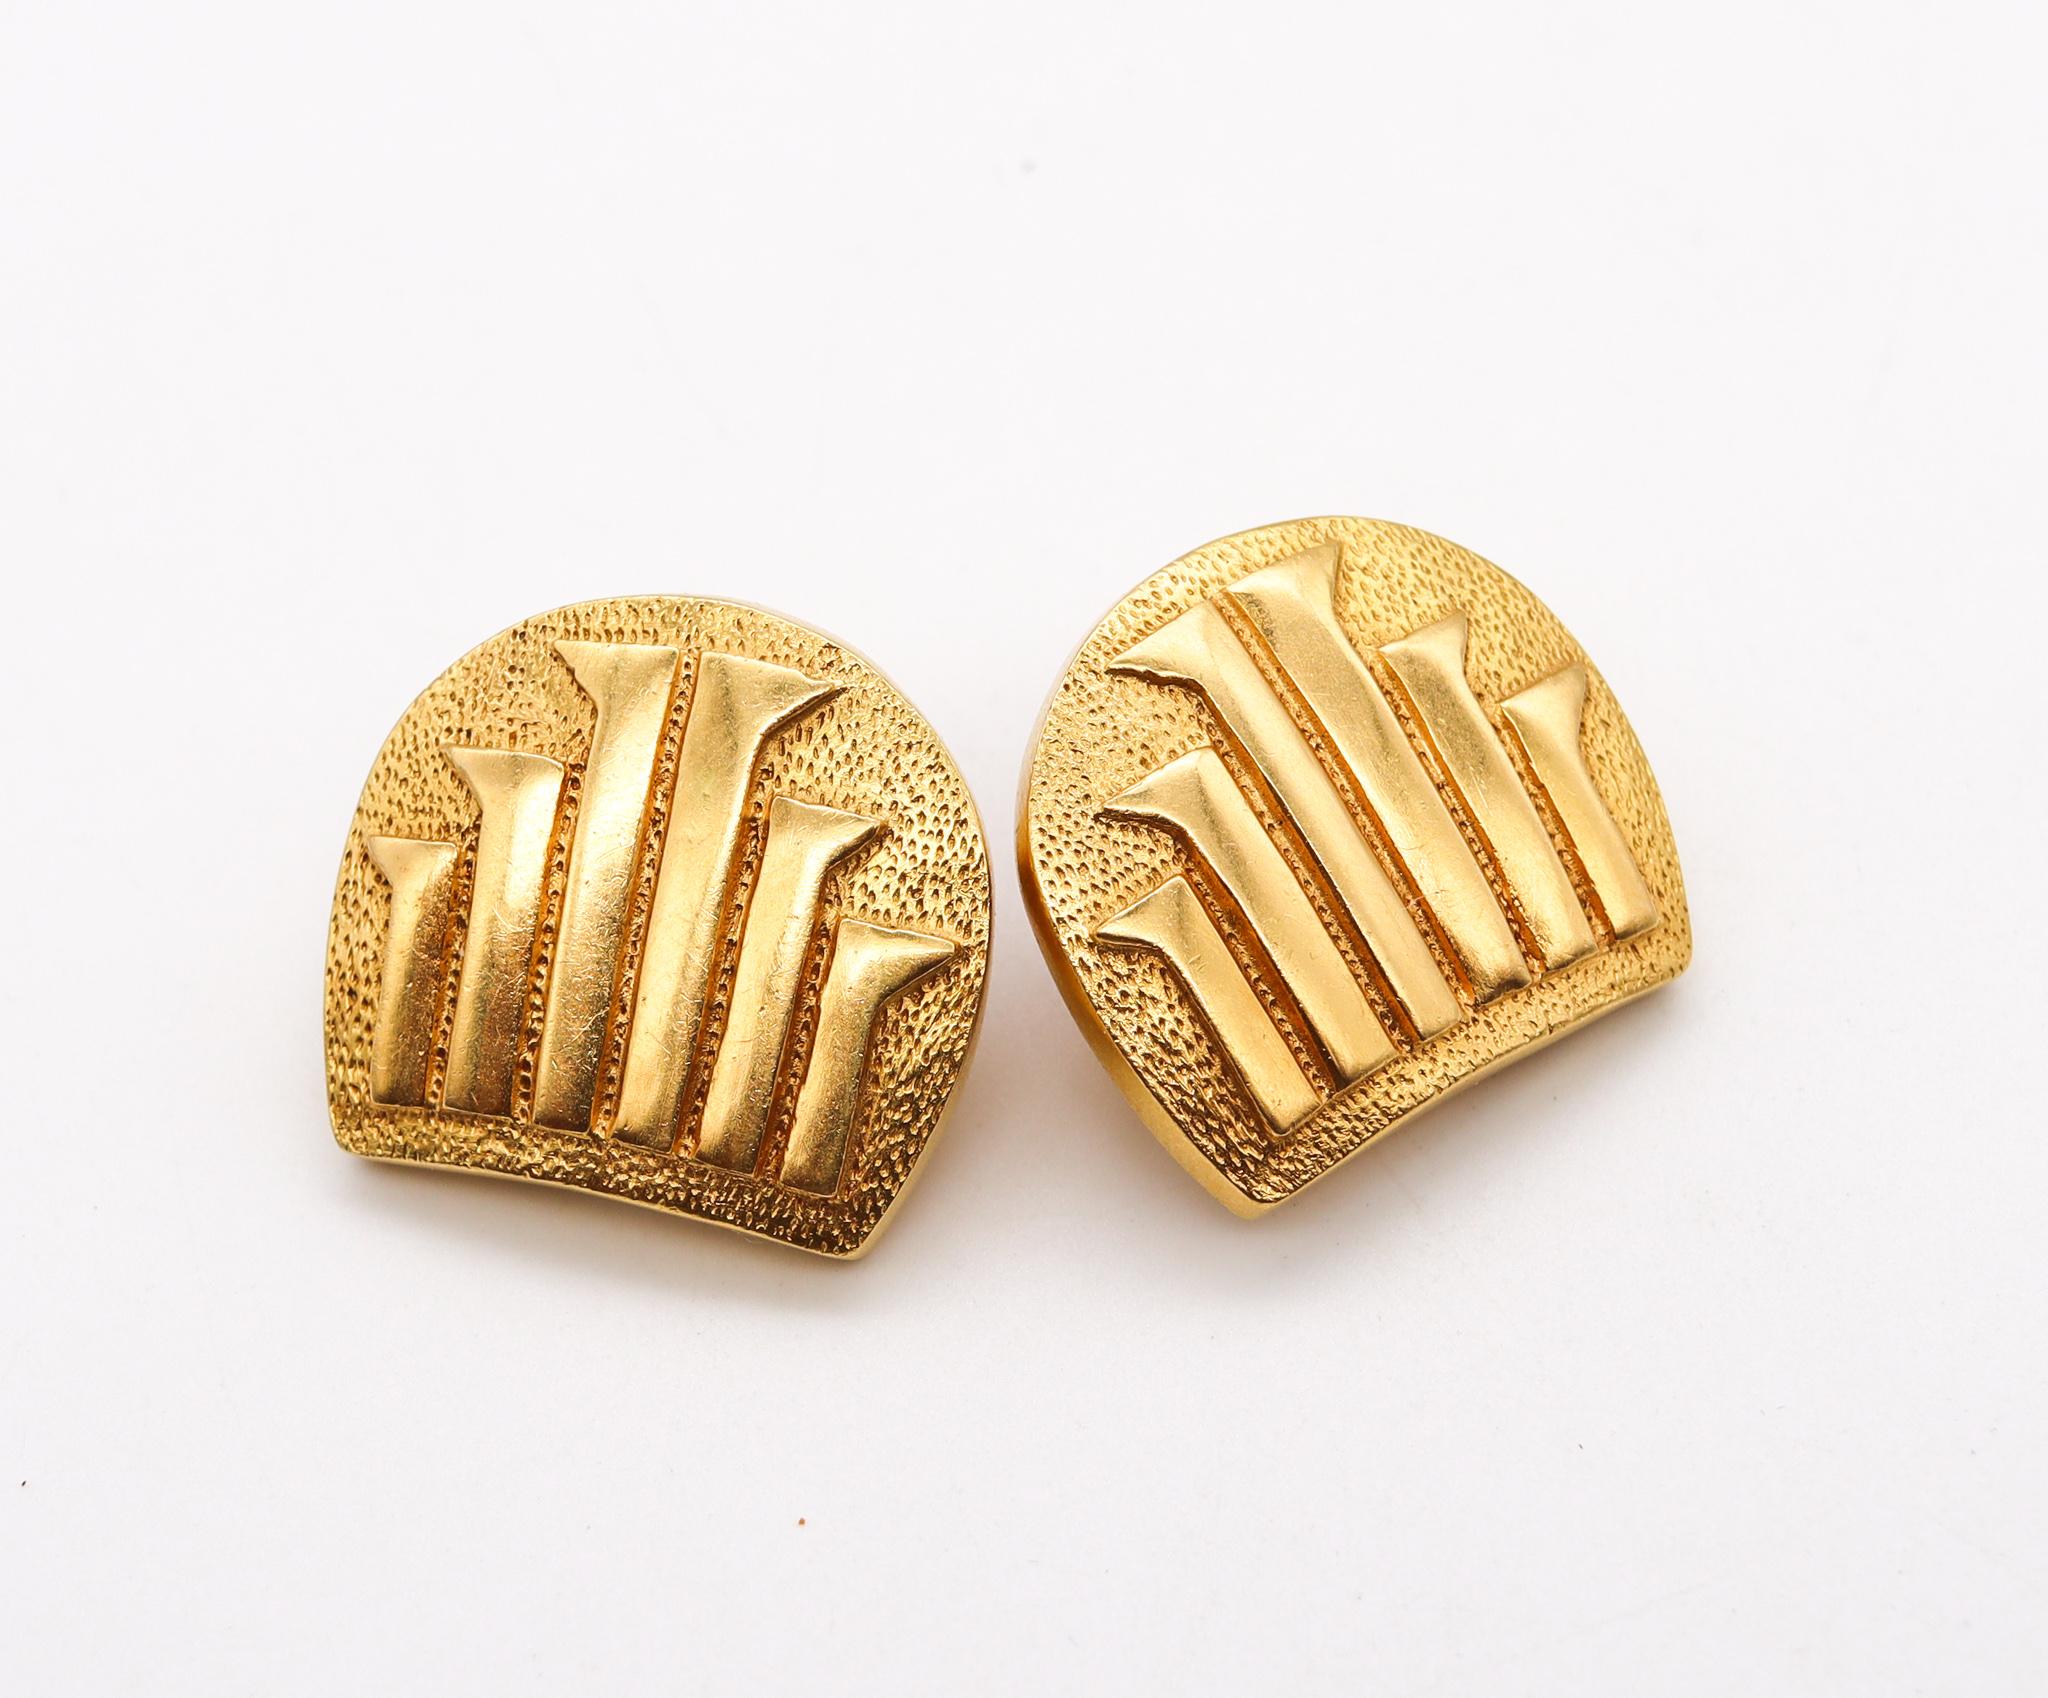 Modernist Lalaounis 1970 Modernisme Geometric Earrings in Solid Textured 18kt Yellow Gold For Sale